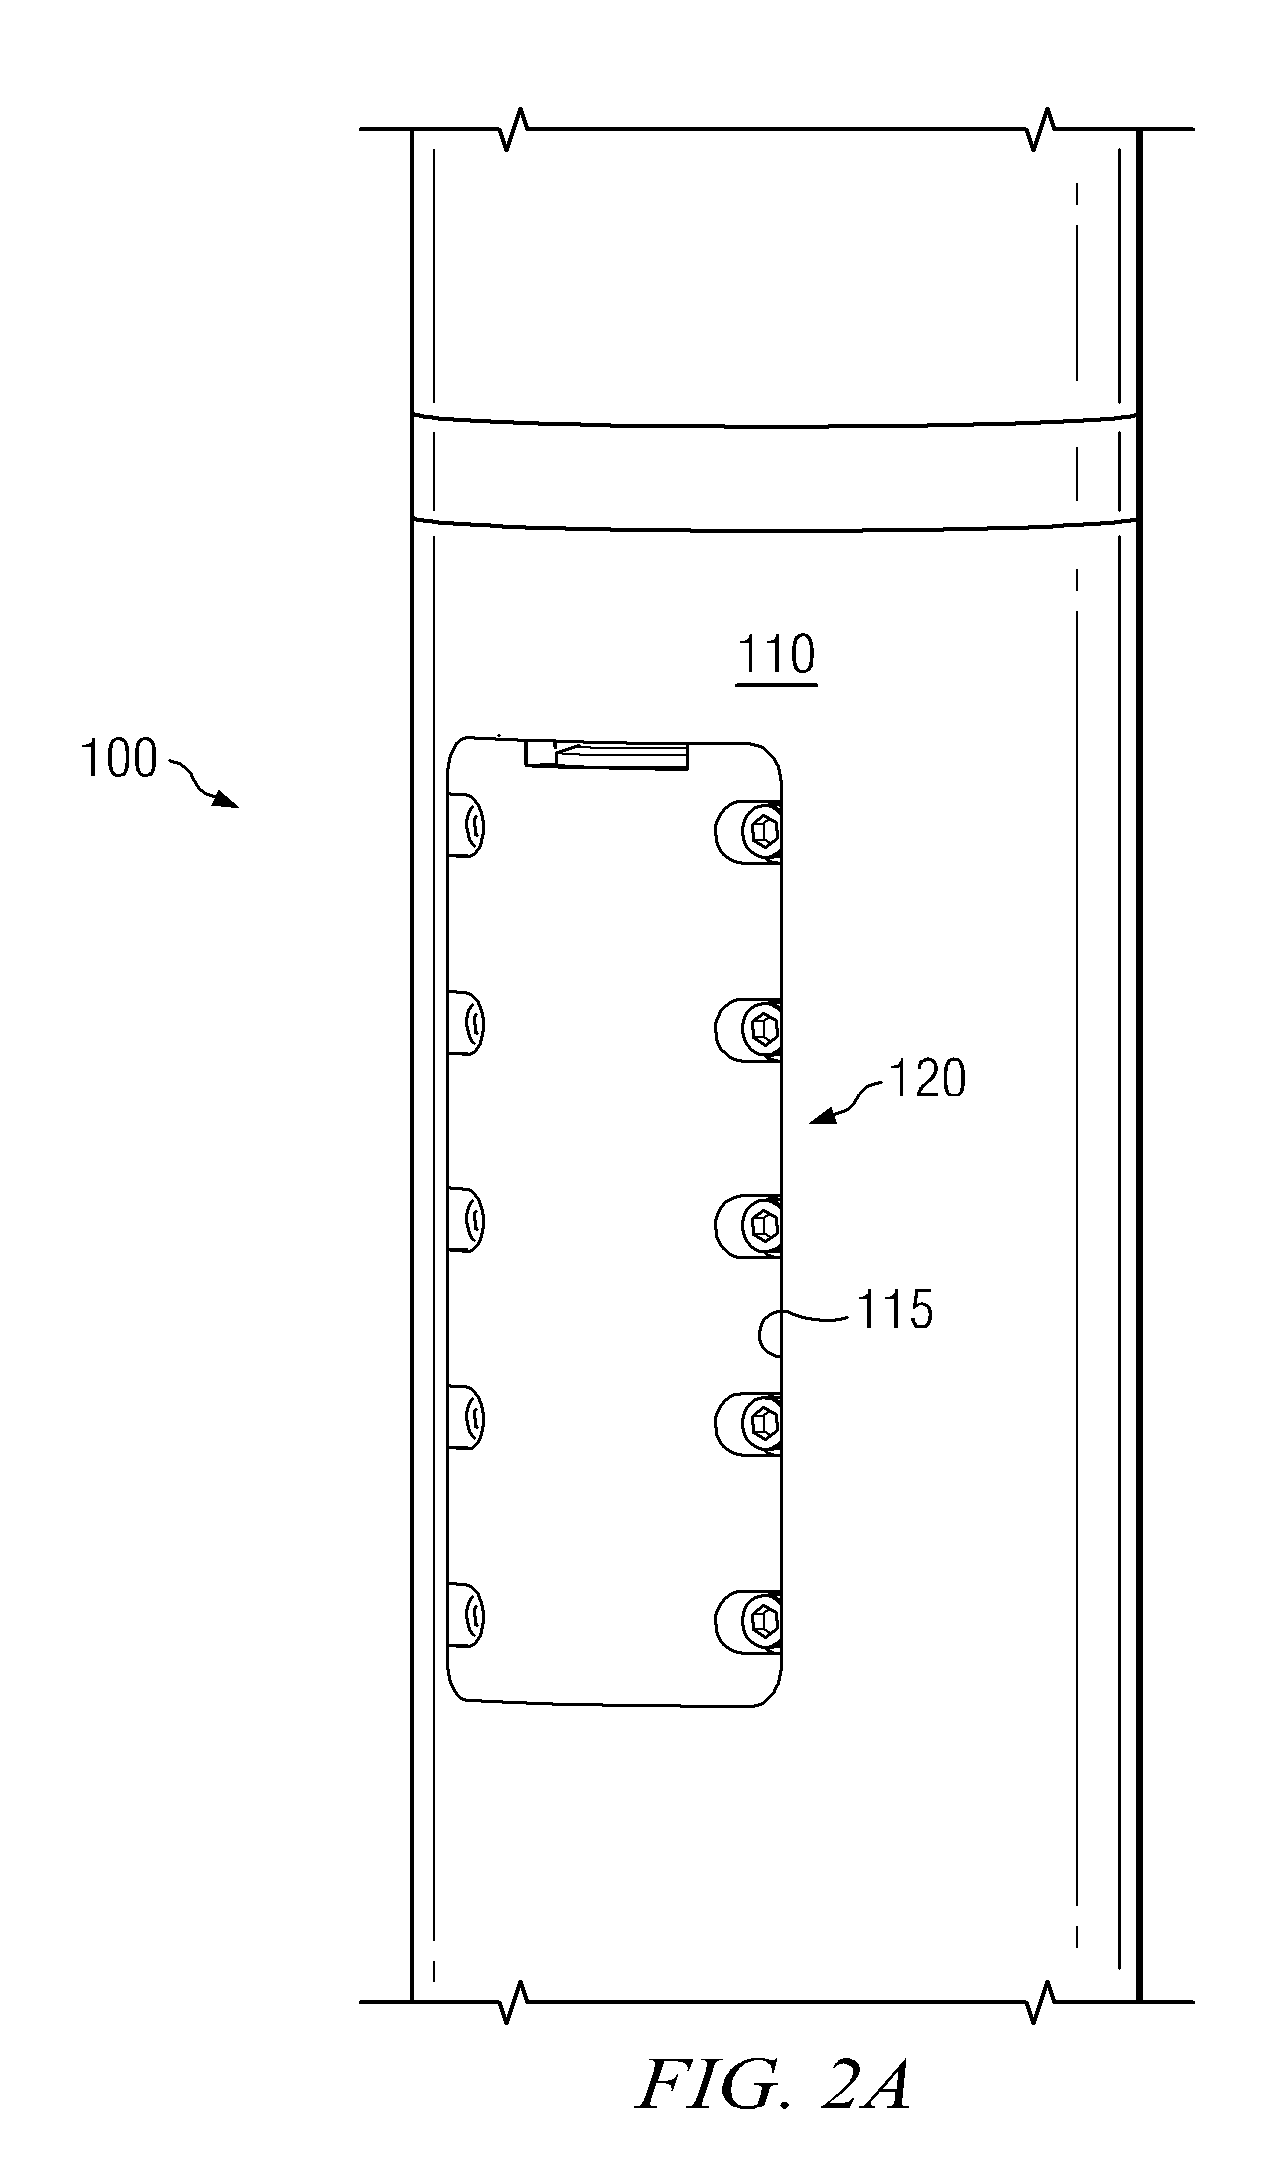 Downhole downlinking system employing a differential pressure transducer